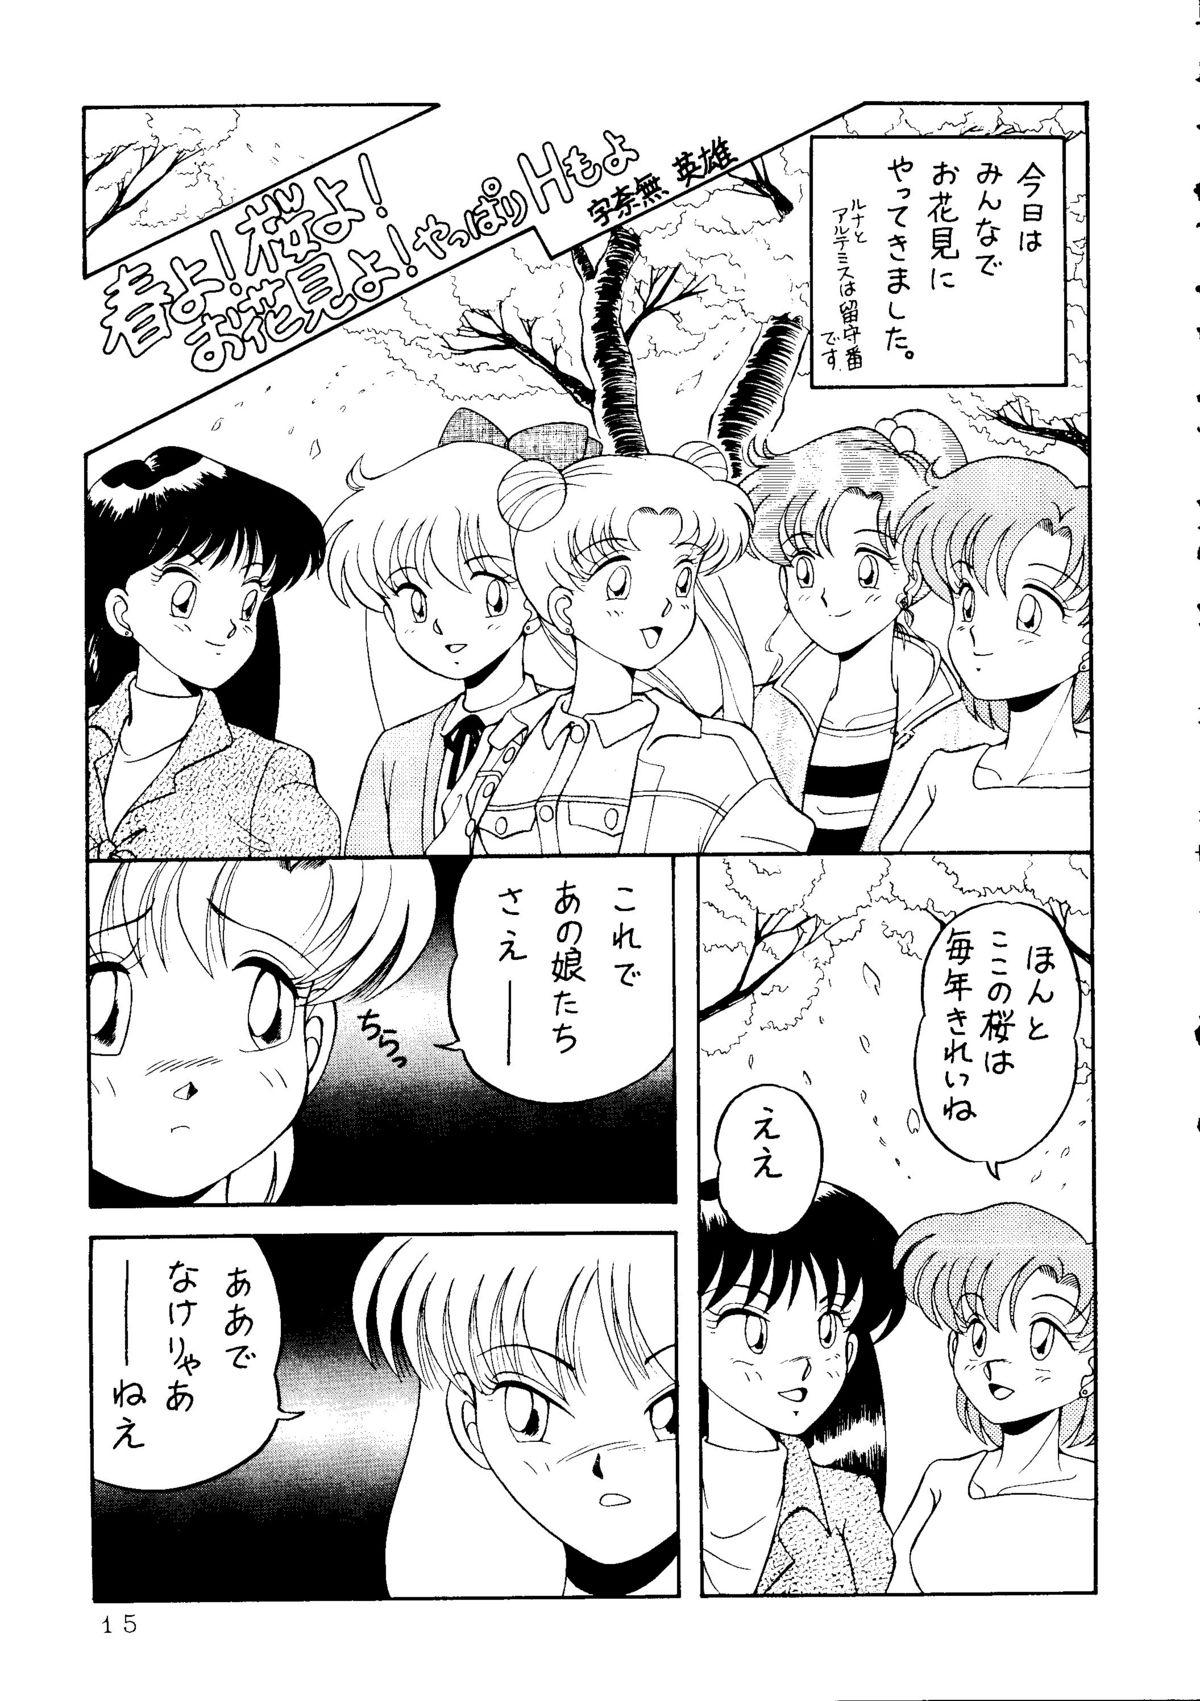 Anal Licking MAKE-UP R - Sailor moon Scene - Page 12